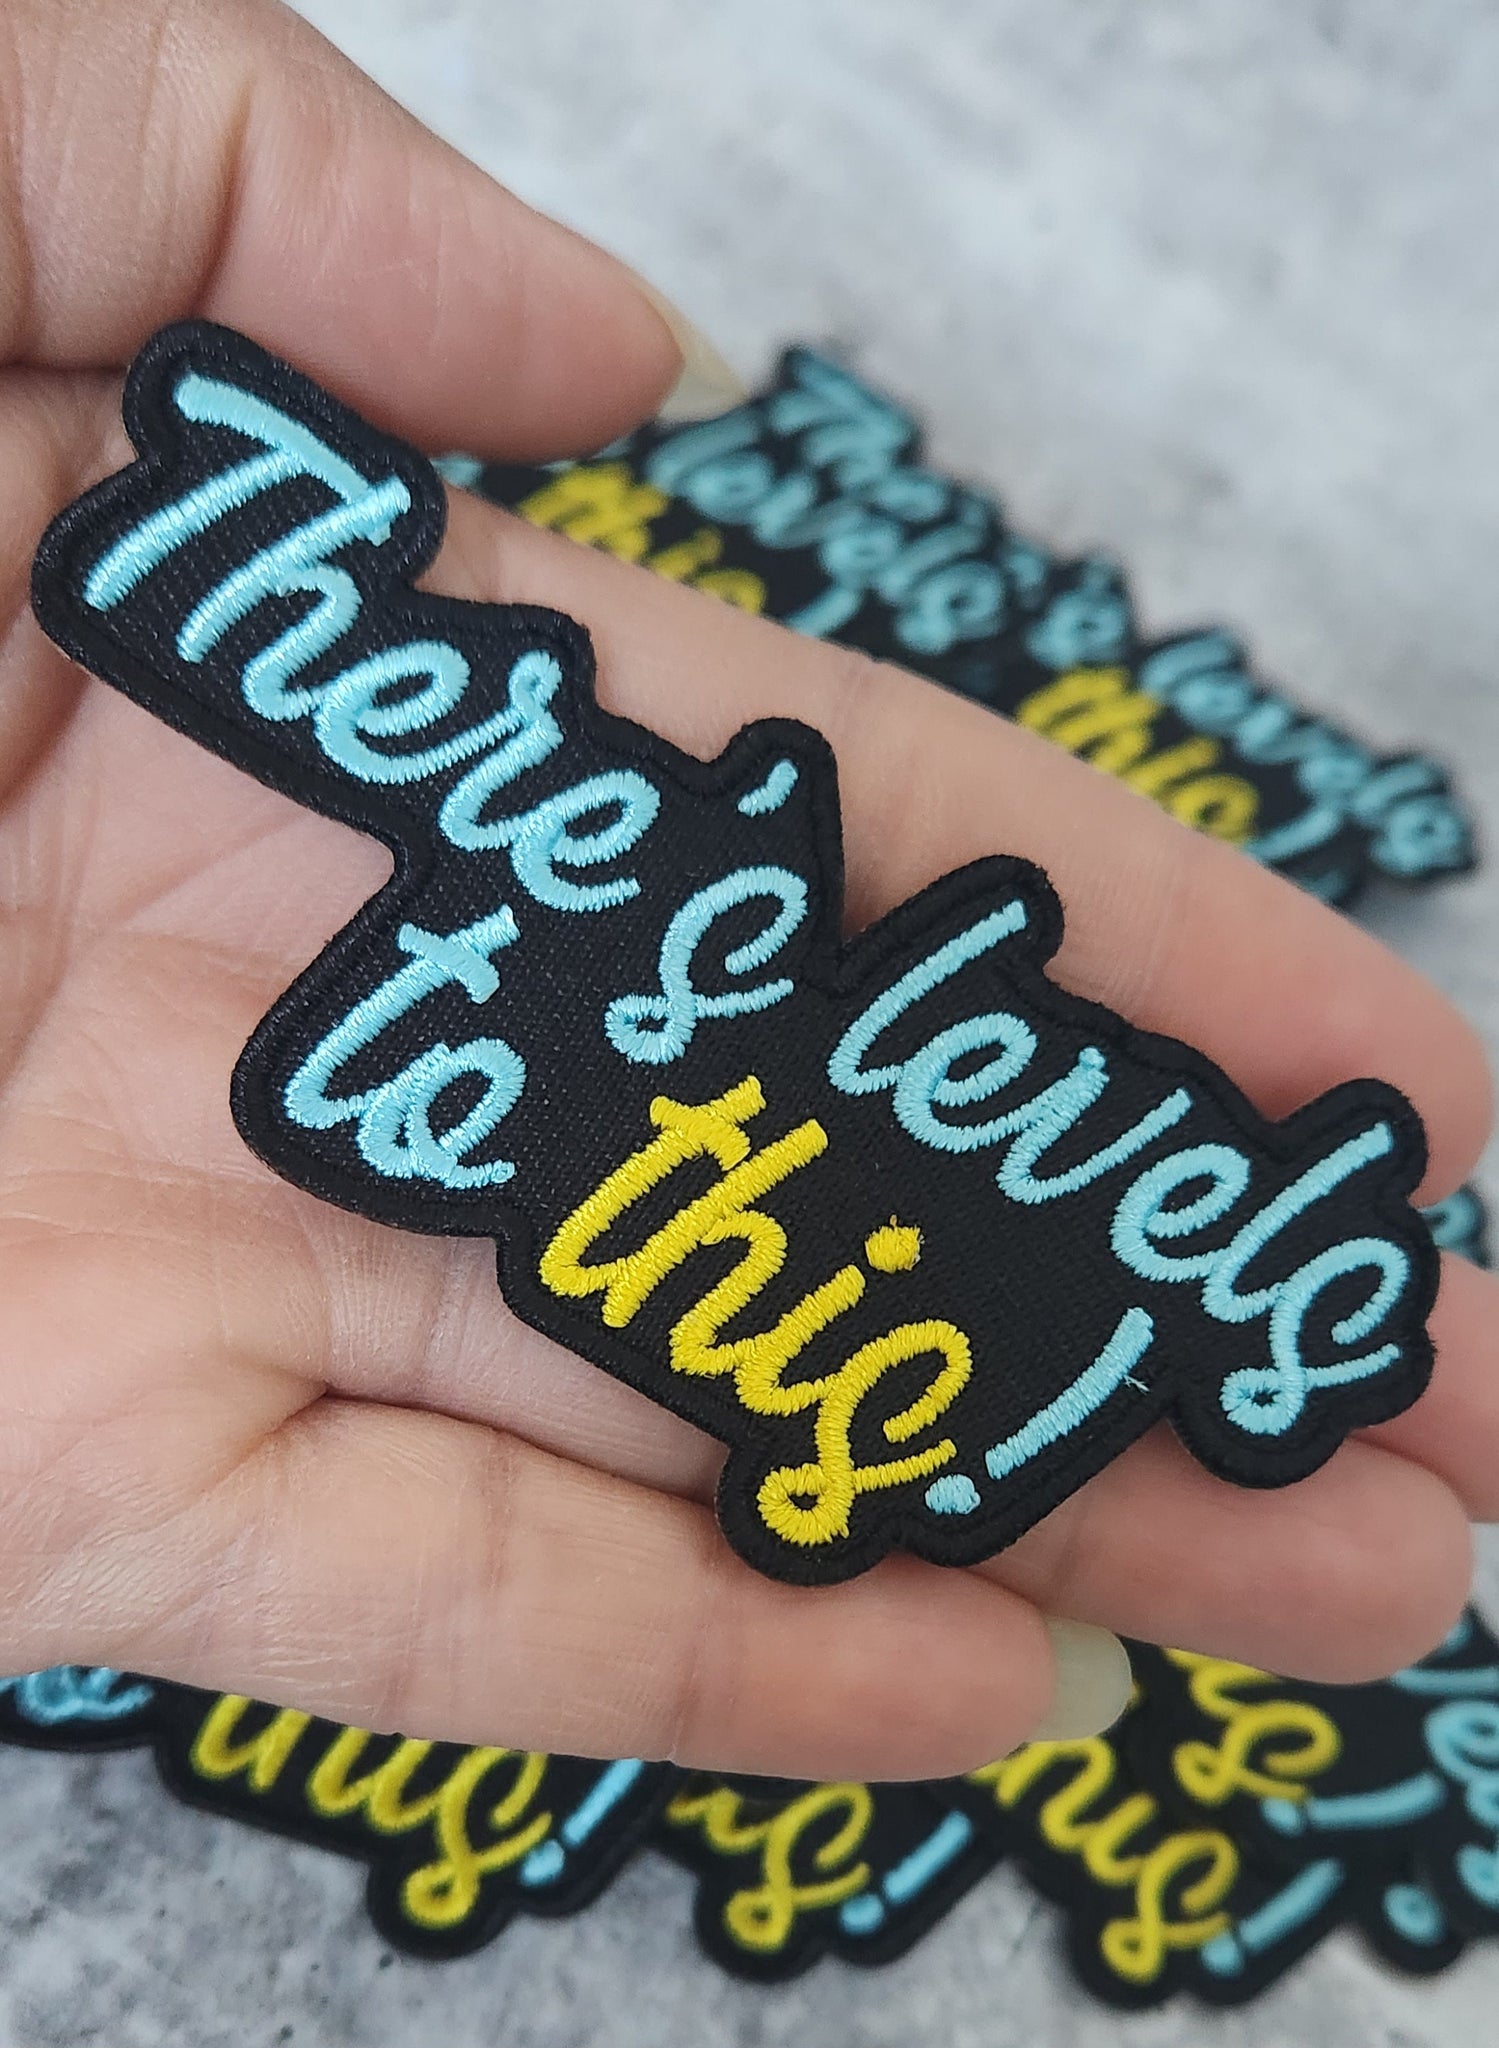 Statement Patch, "There's Levels to This" 1-pc, Size 3", Iron-on Embroidered Patch, The Best Patch for Clothing and Accessories, DIY Appliqu